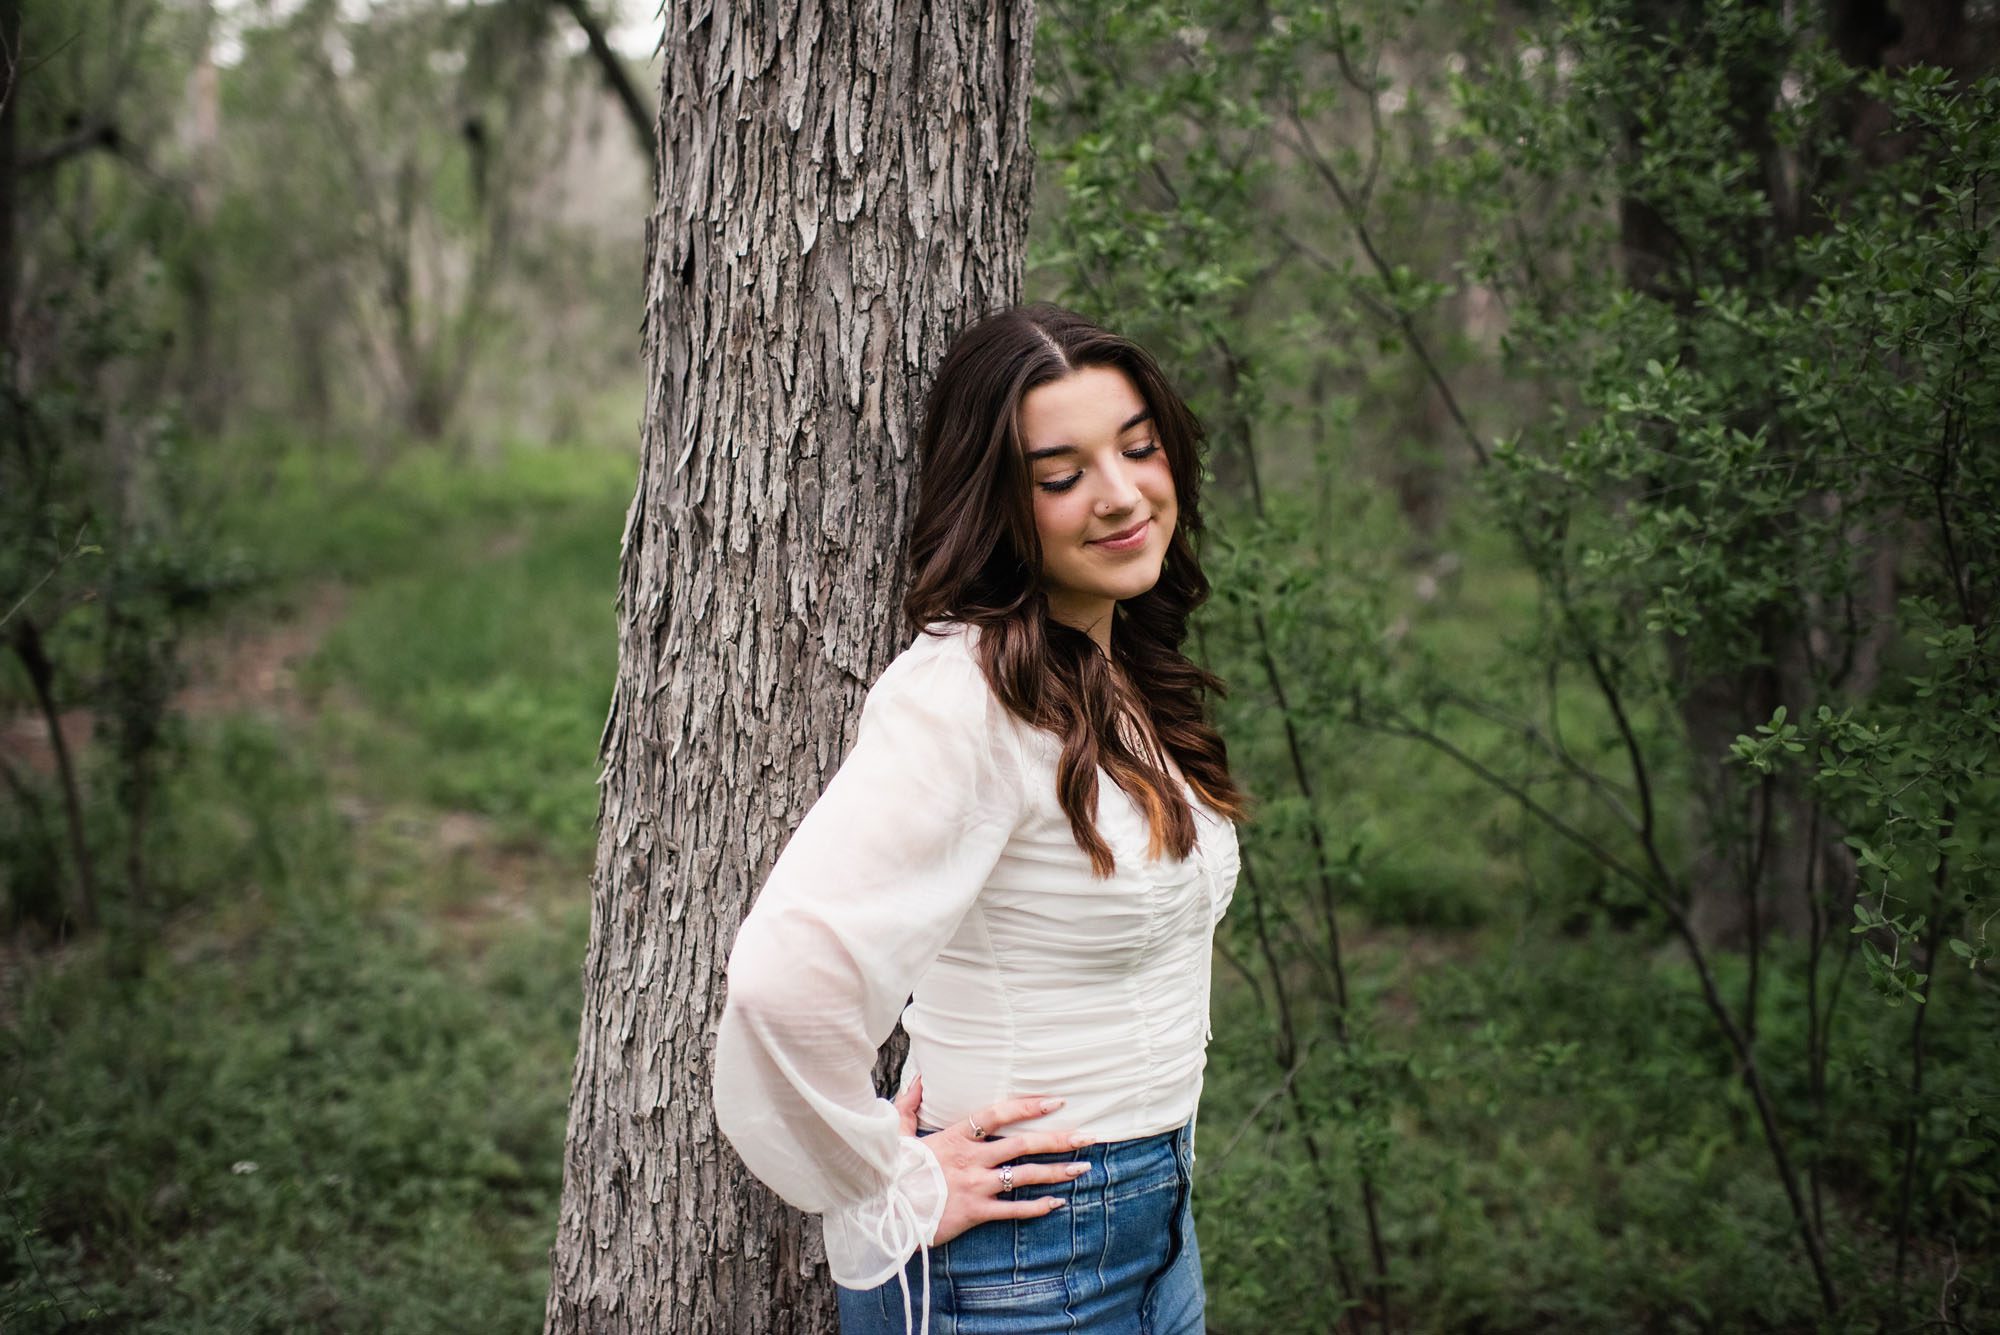 Girl in white shirt and jeans standing by tree looking down, San Antonio senior photographer